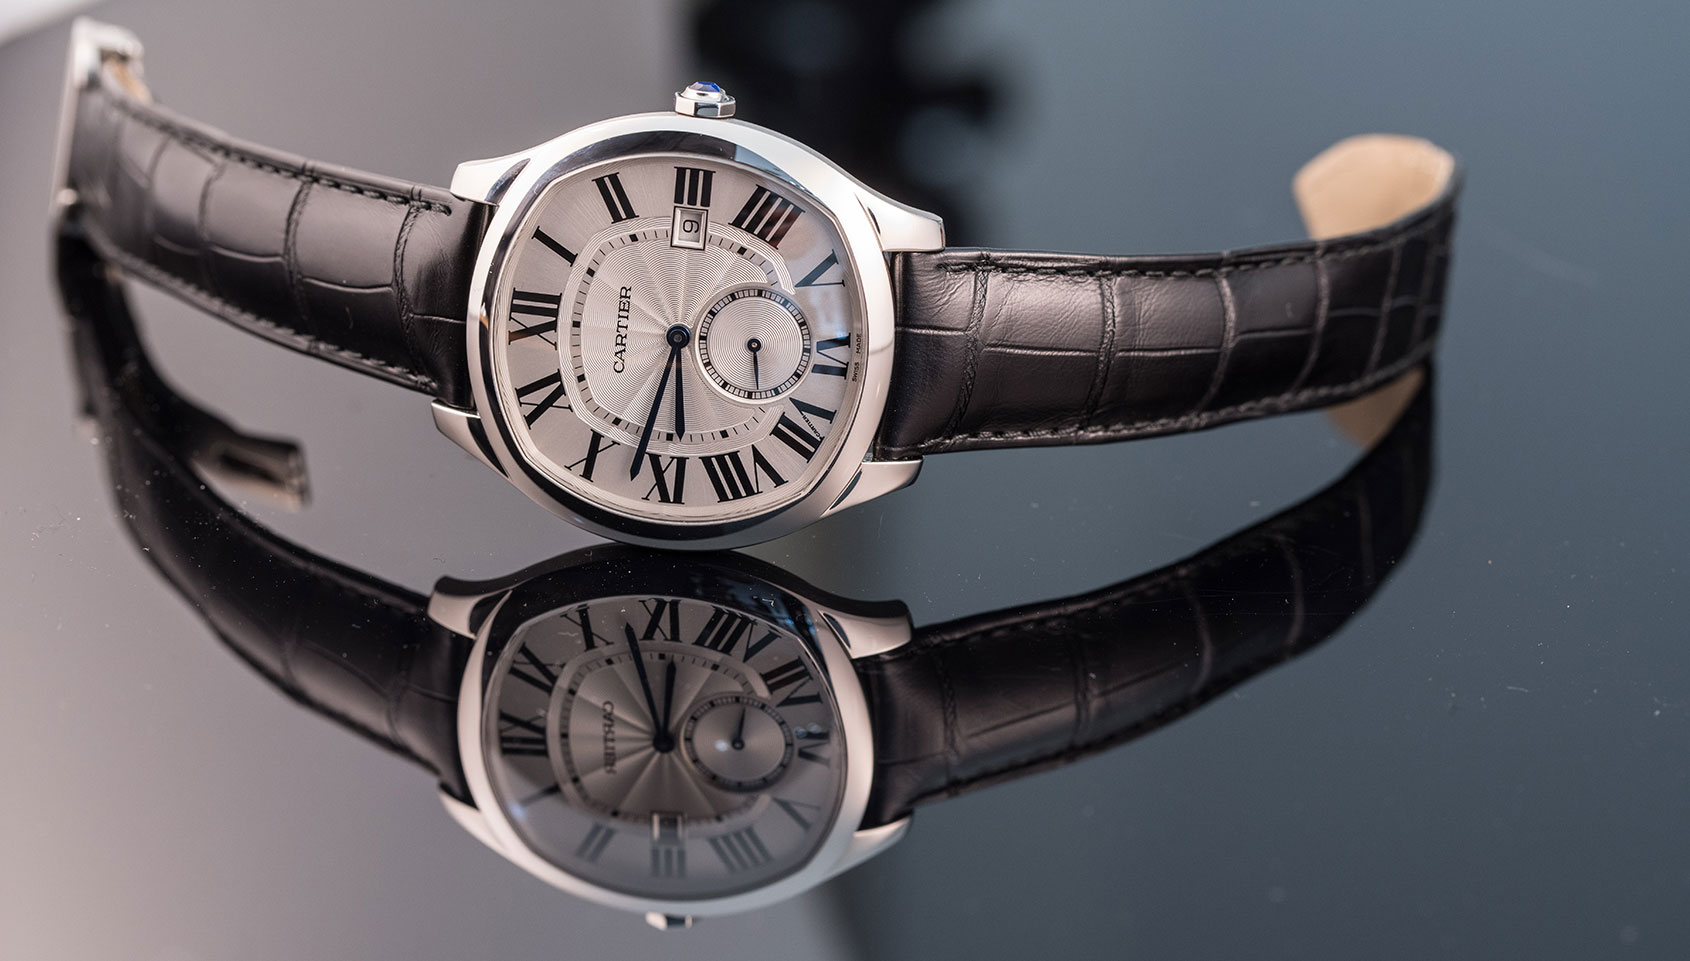 cartier watch quotes